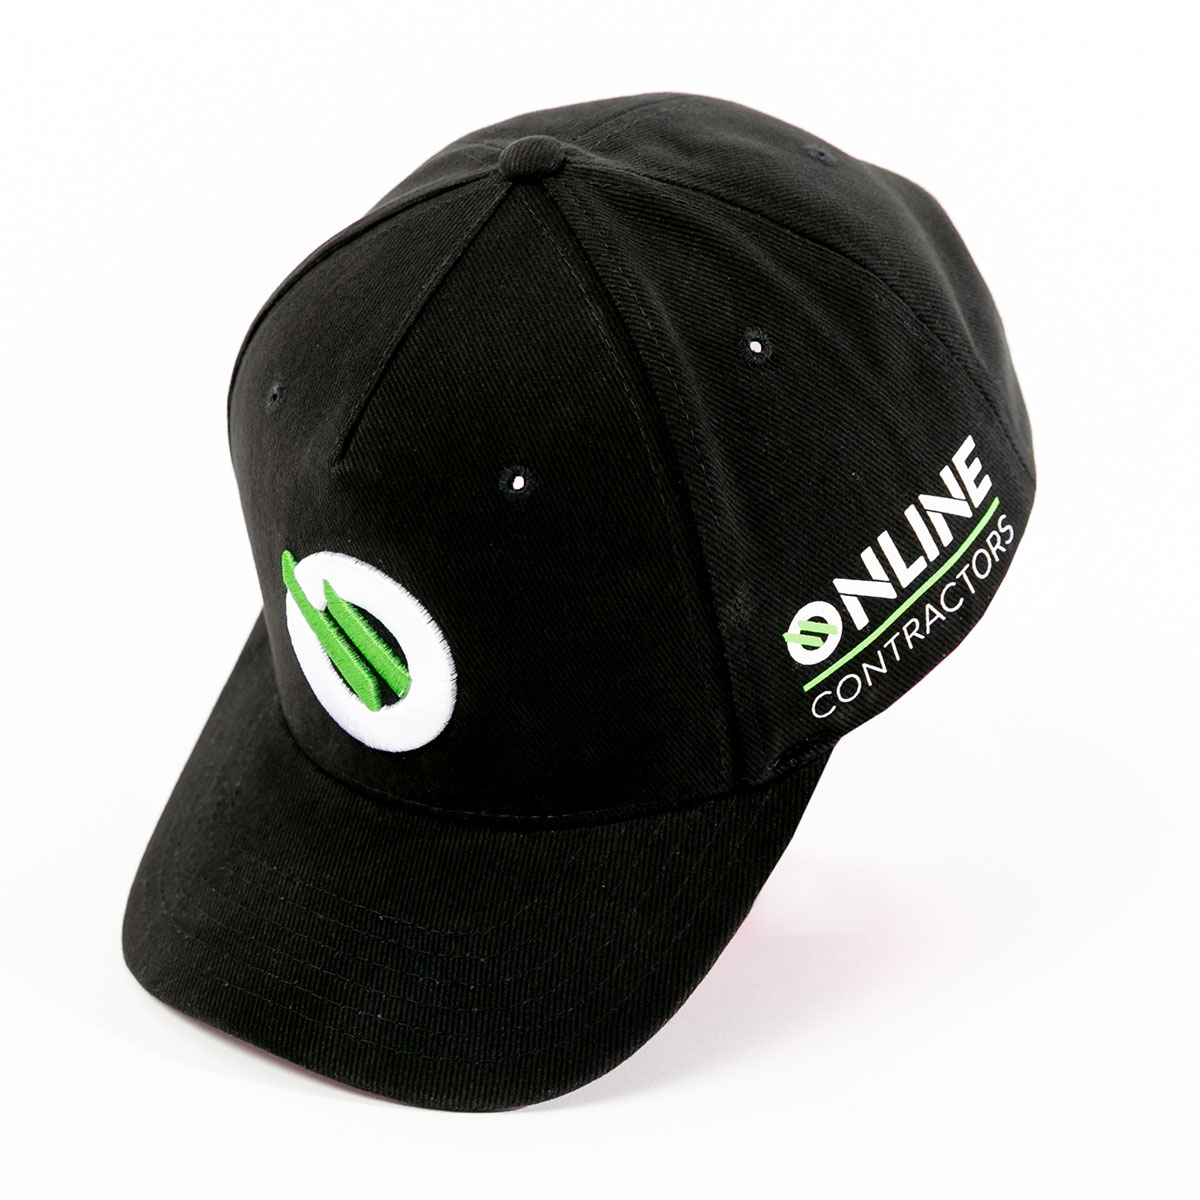 Headwear Slider Black cotton cap with 3D Puff Embroidery front logo and screen printed side logo